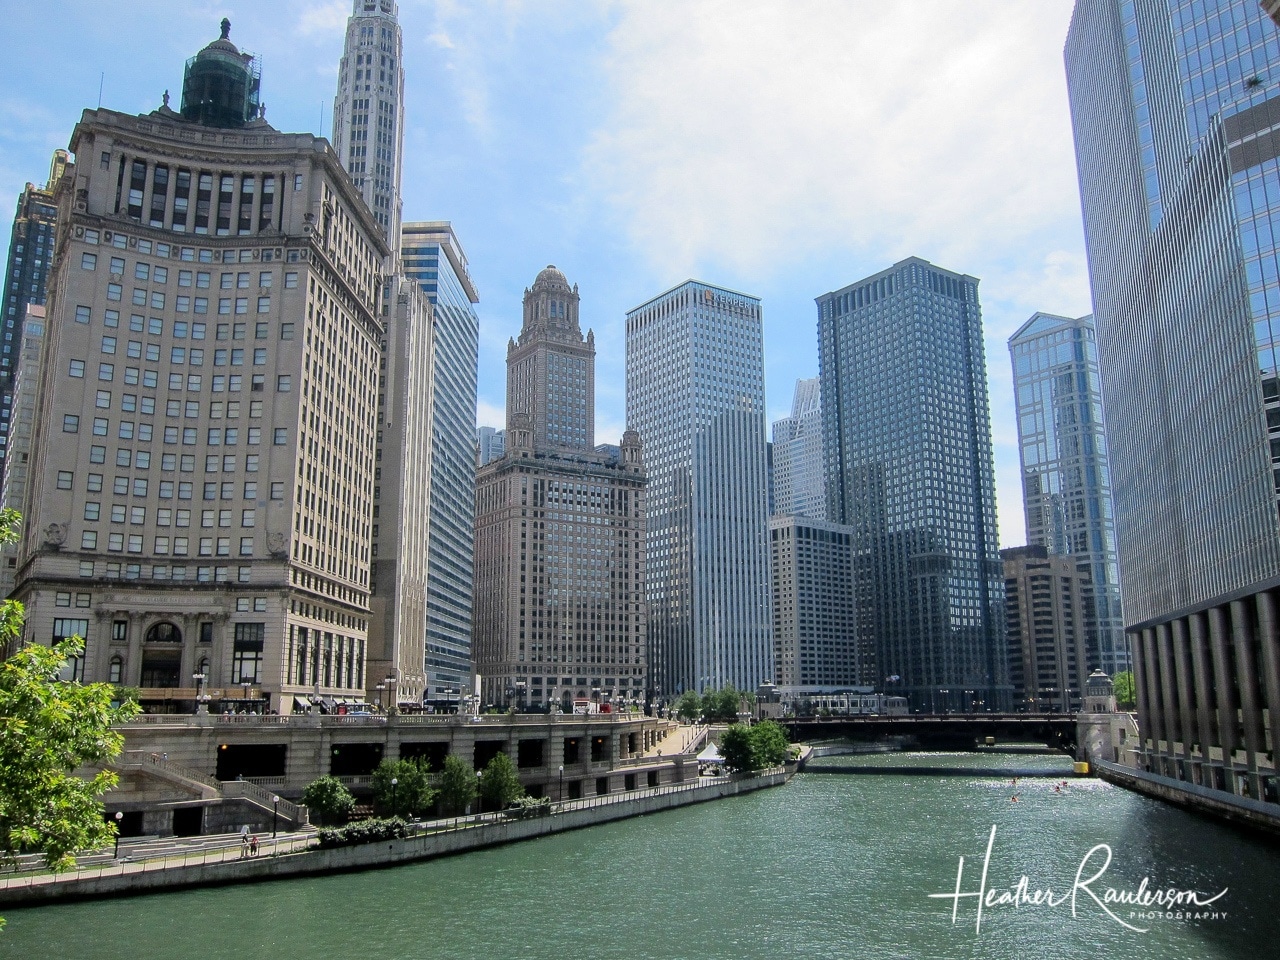 View of Chicago Architecture from the river